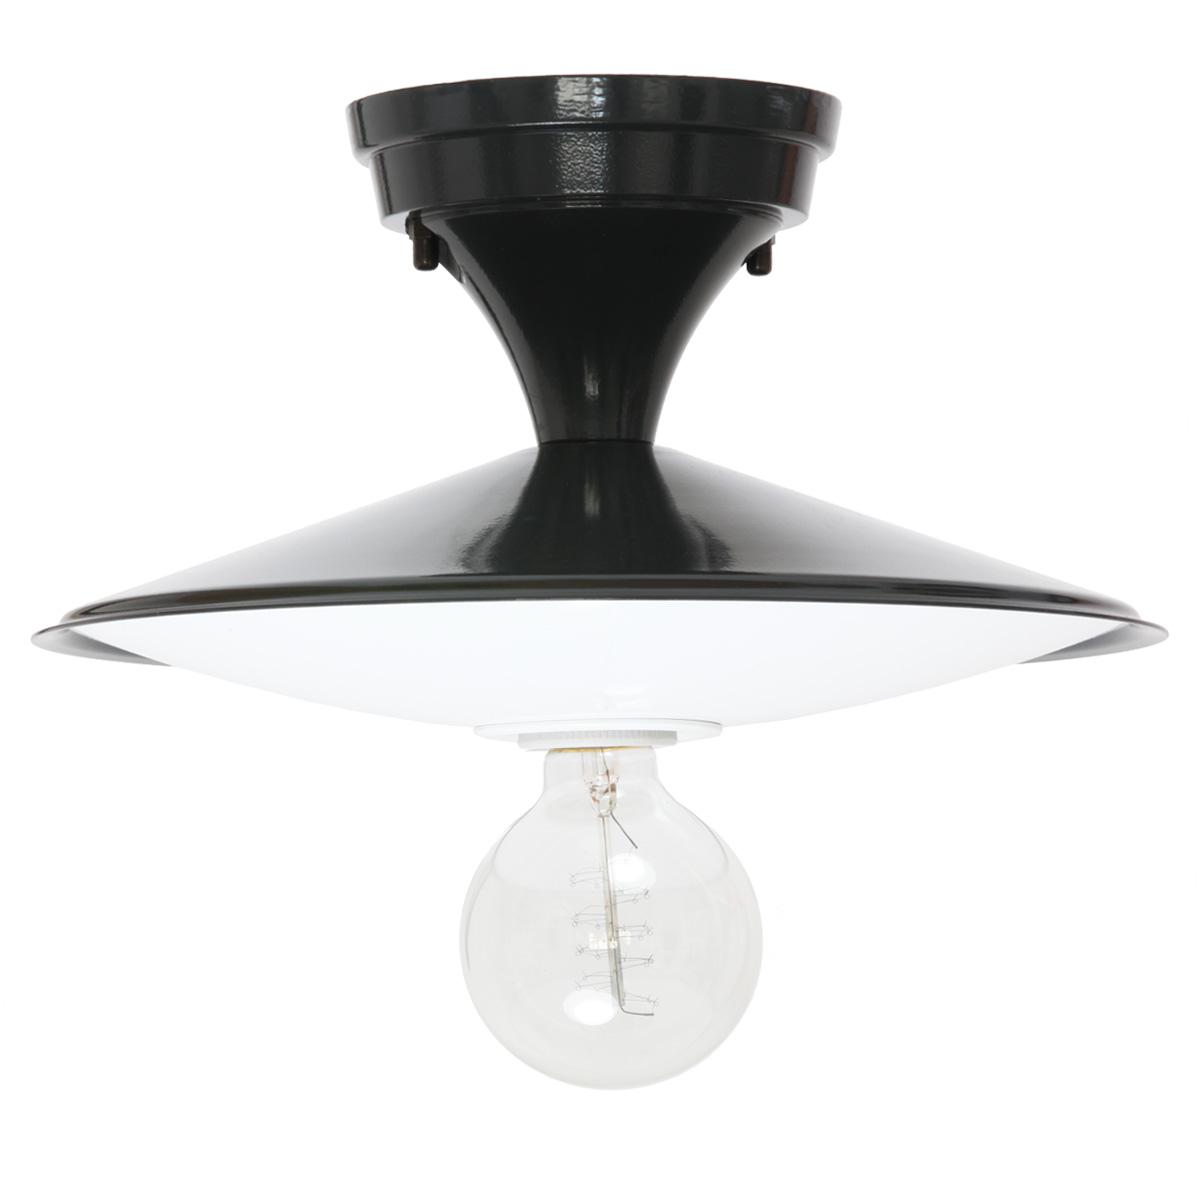 Ceiling or pendant luminaire for outdoor use